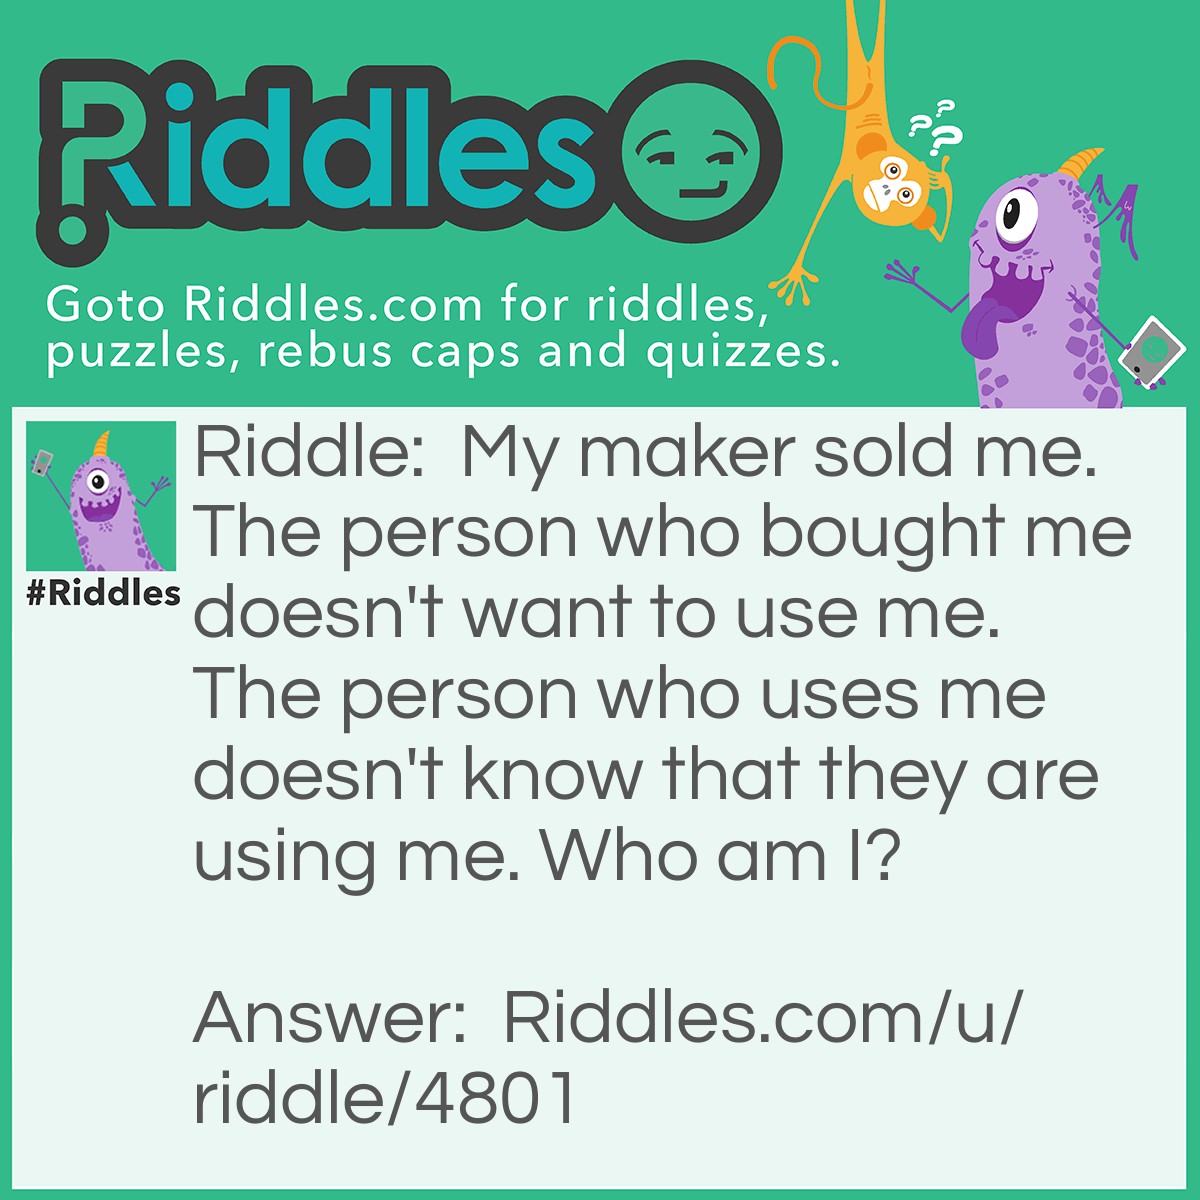 Riddle: My maker sold me. The person who bought me doesn't want to use me. The person who uses me doesn't know that they are using me. Who am I? Answer: A coffin.